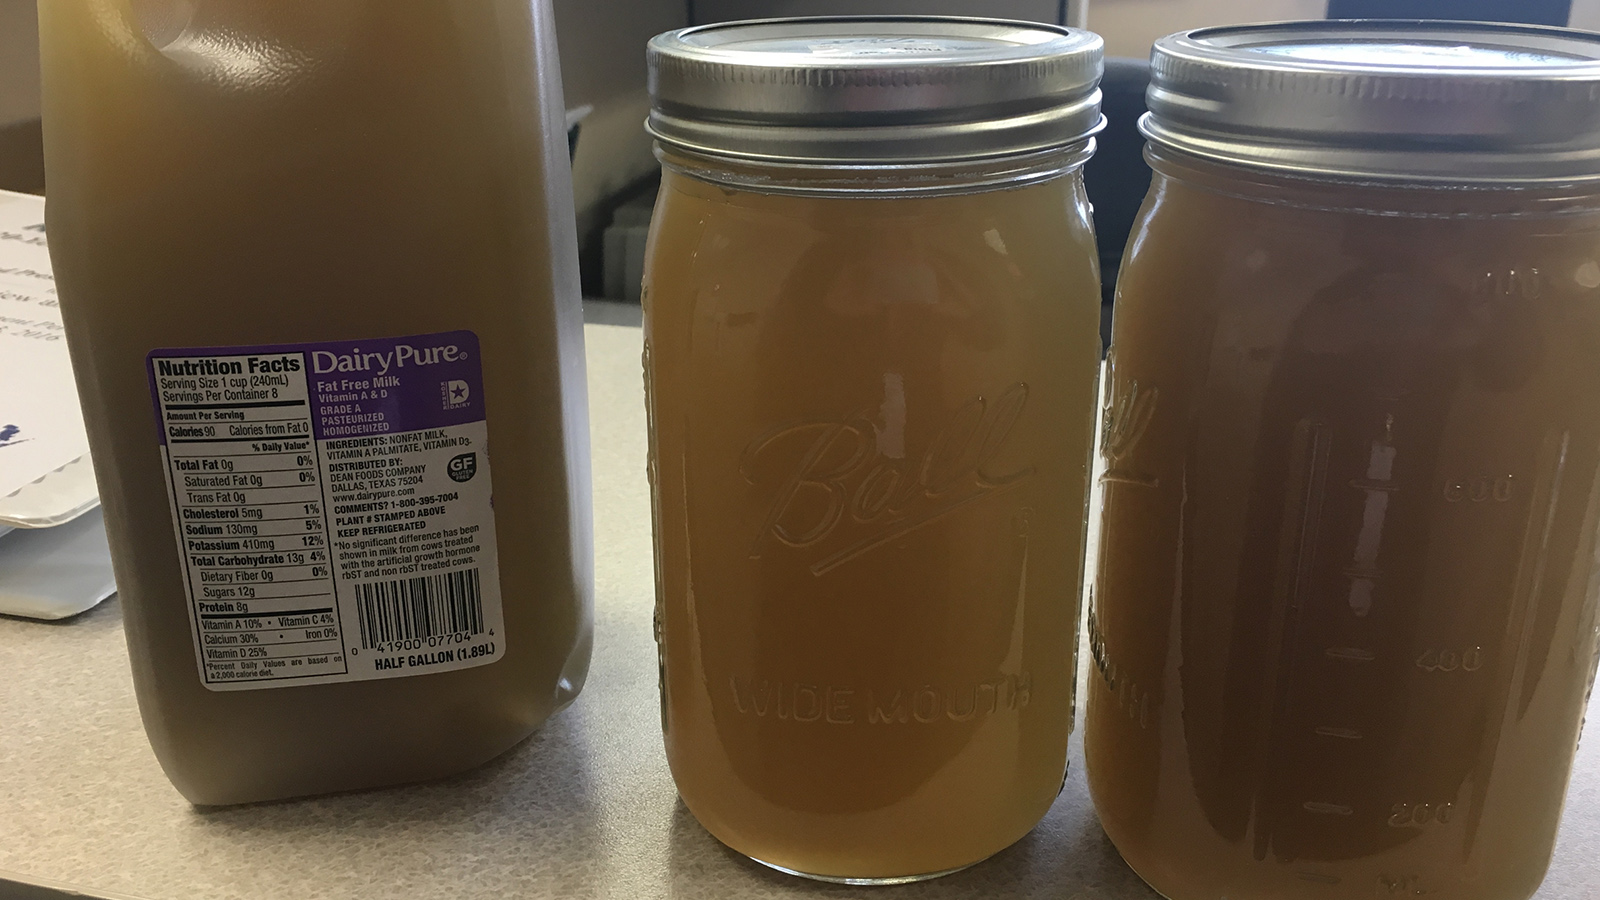 Half-gallon milk jug and two canning jars are filled with brown, opaque water.